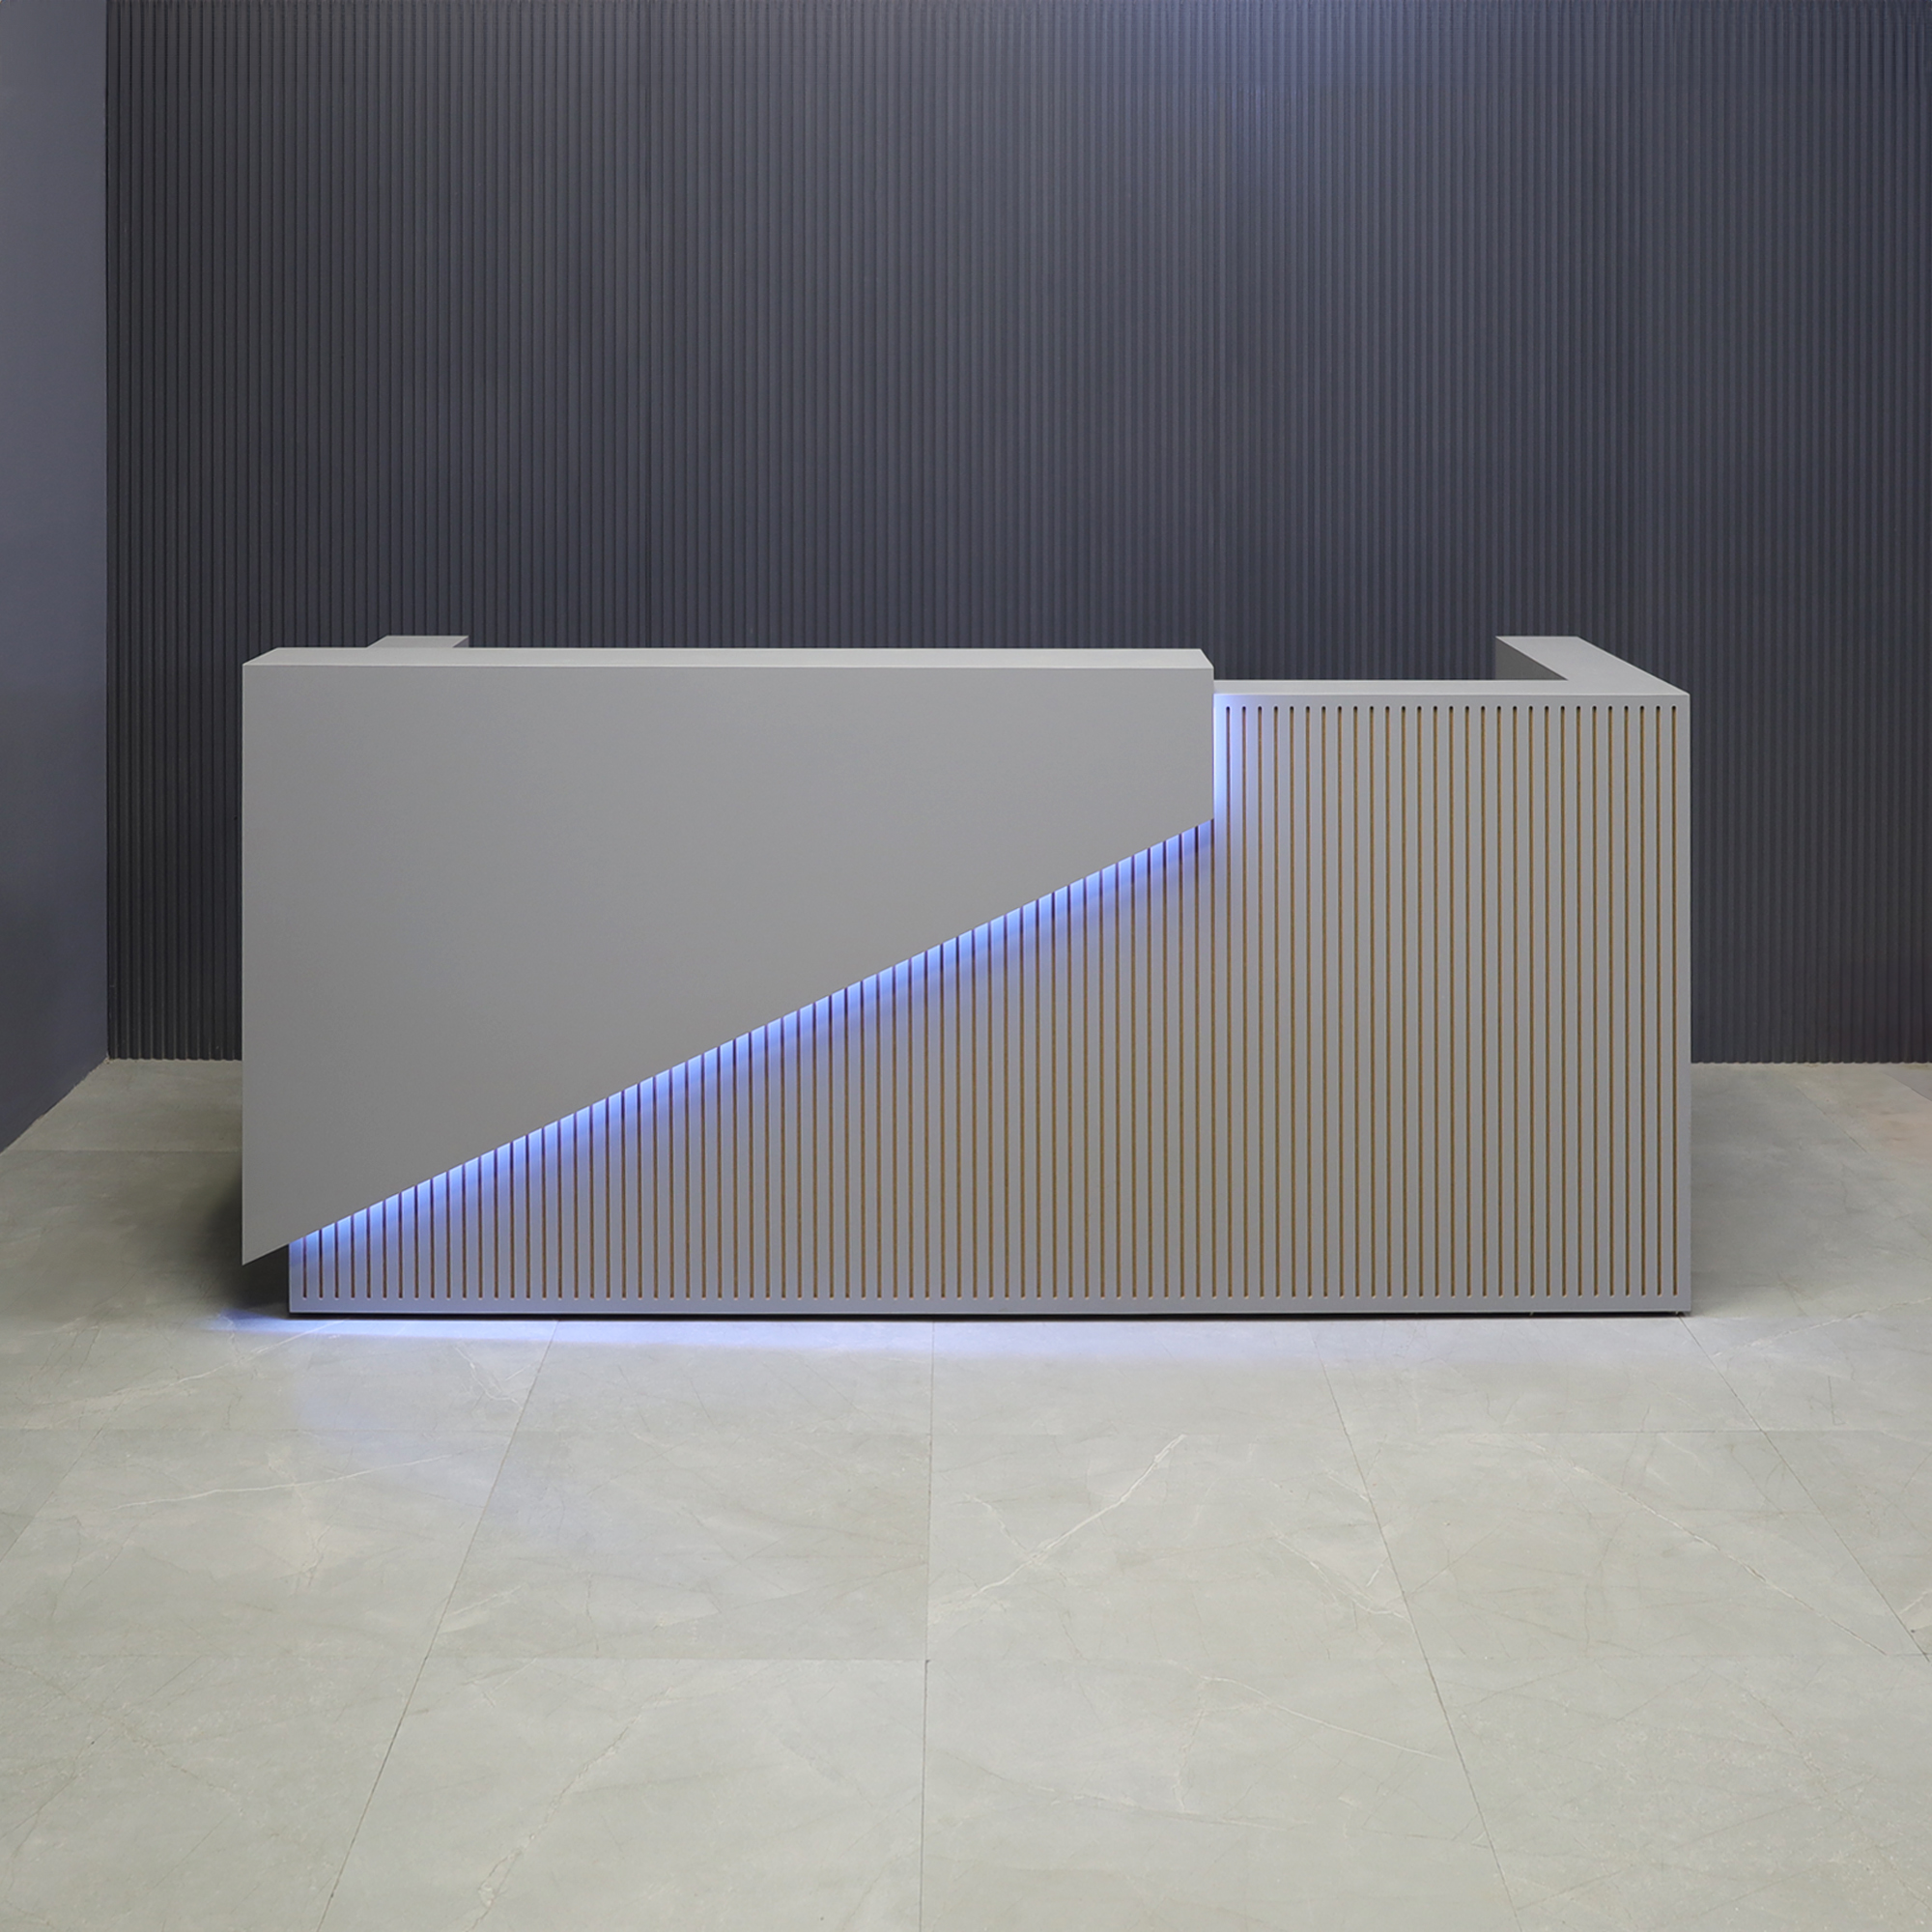 Miami Custom Reception Desk in fog gray matte laminate counter, grooved front panel and desk, with color LED shown here.